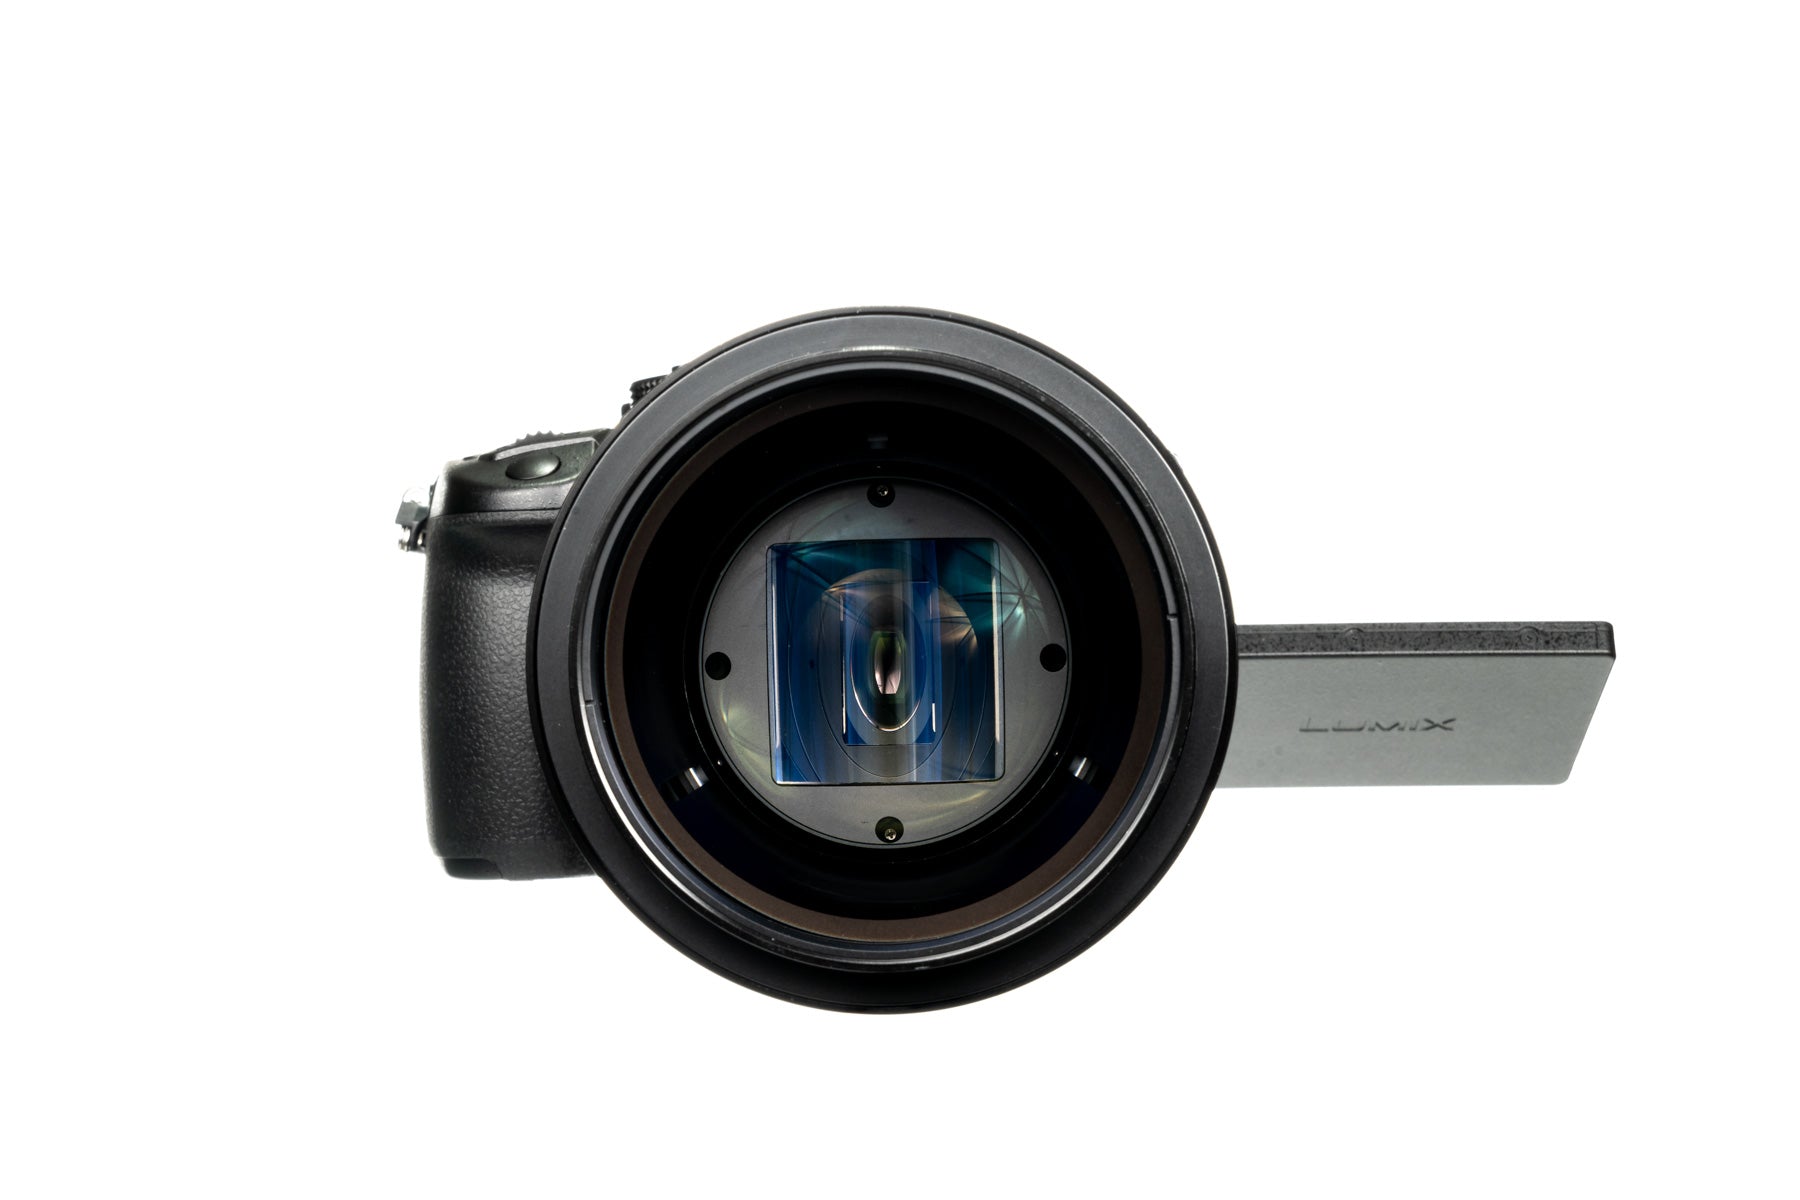 Vazen 40mm T/2 1.8X Anamorphic Lens for MFT Camera with Attached Camera from Behind